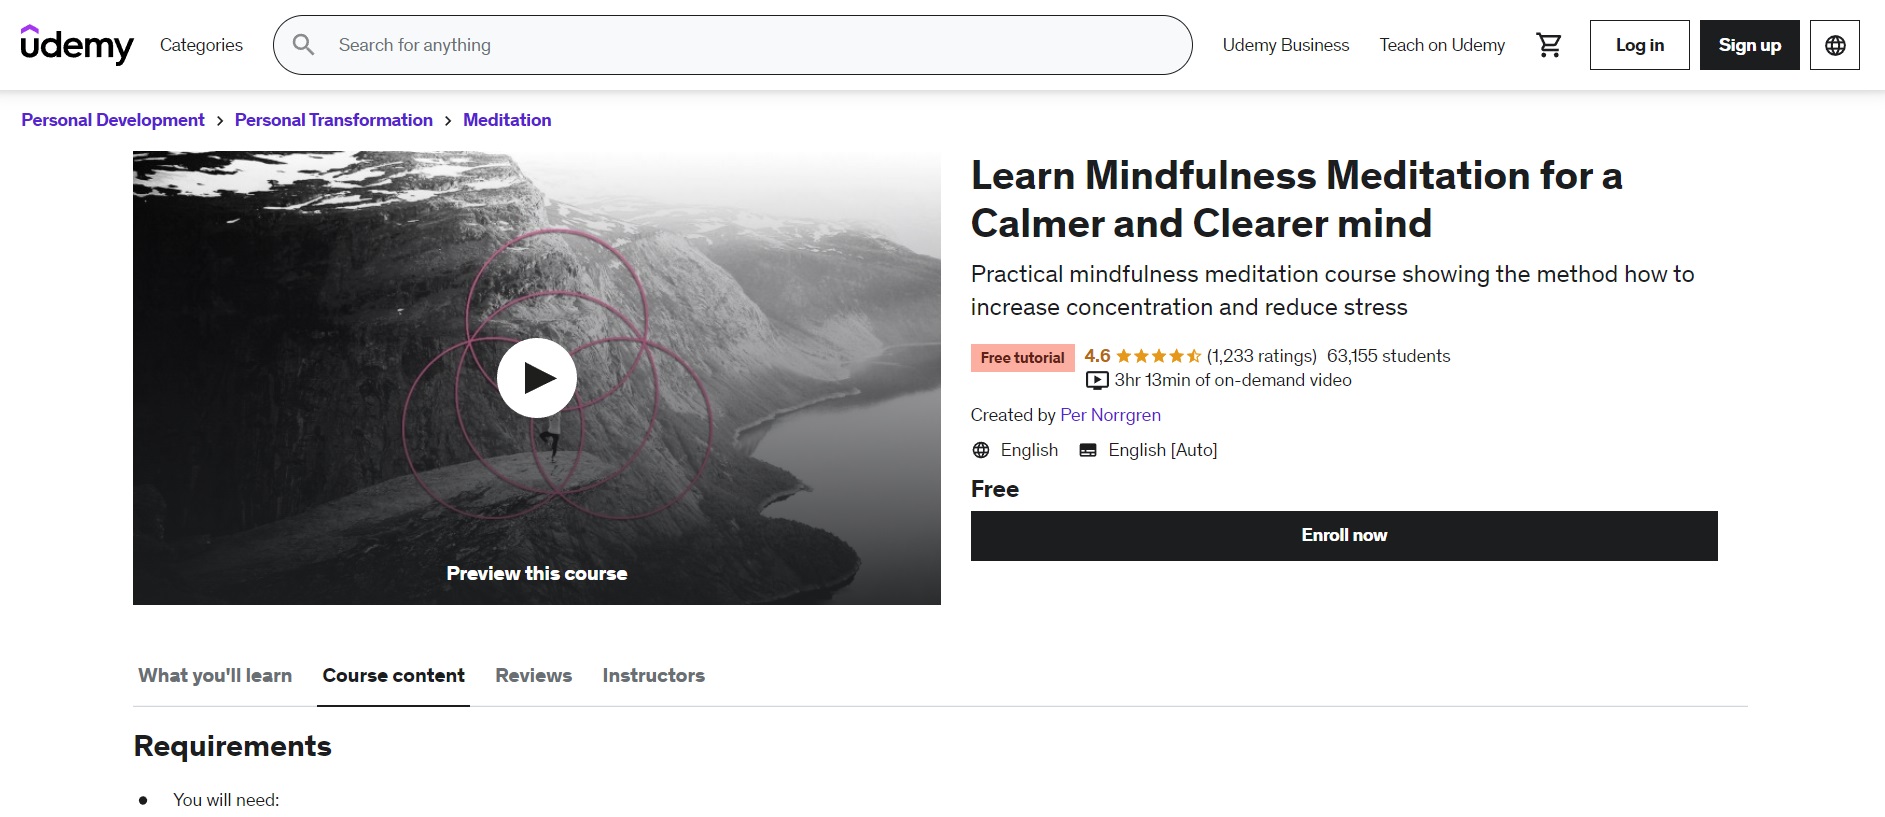 Learn Mindfulness Meditation For A Calmer And Clearer Mind